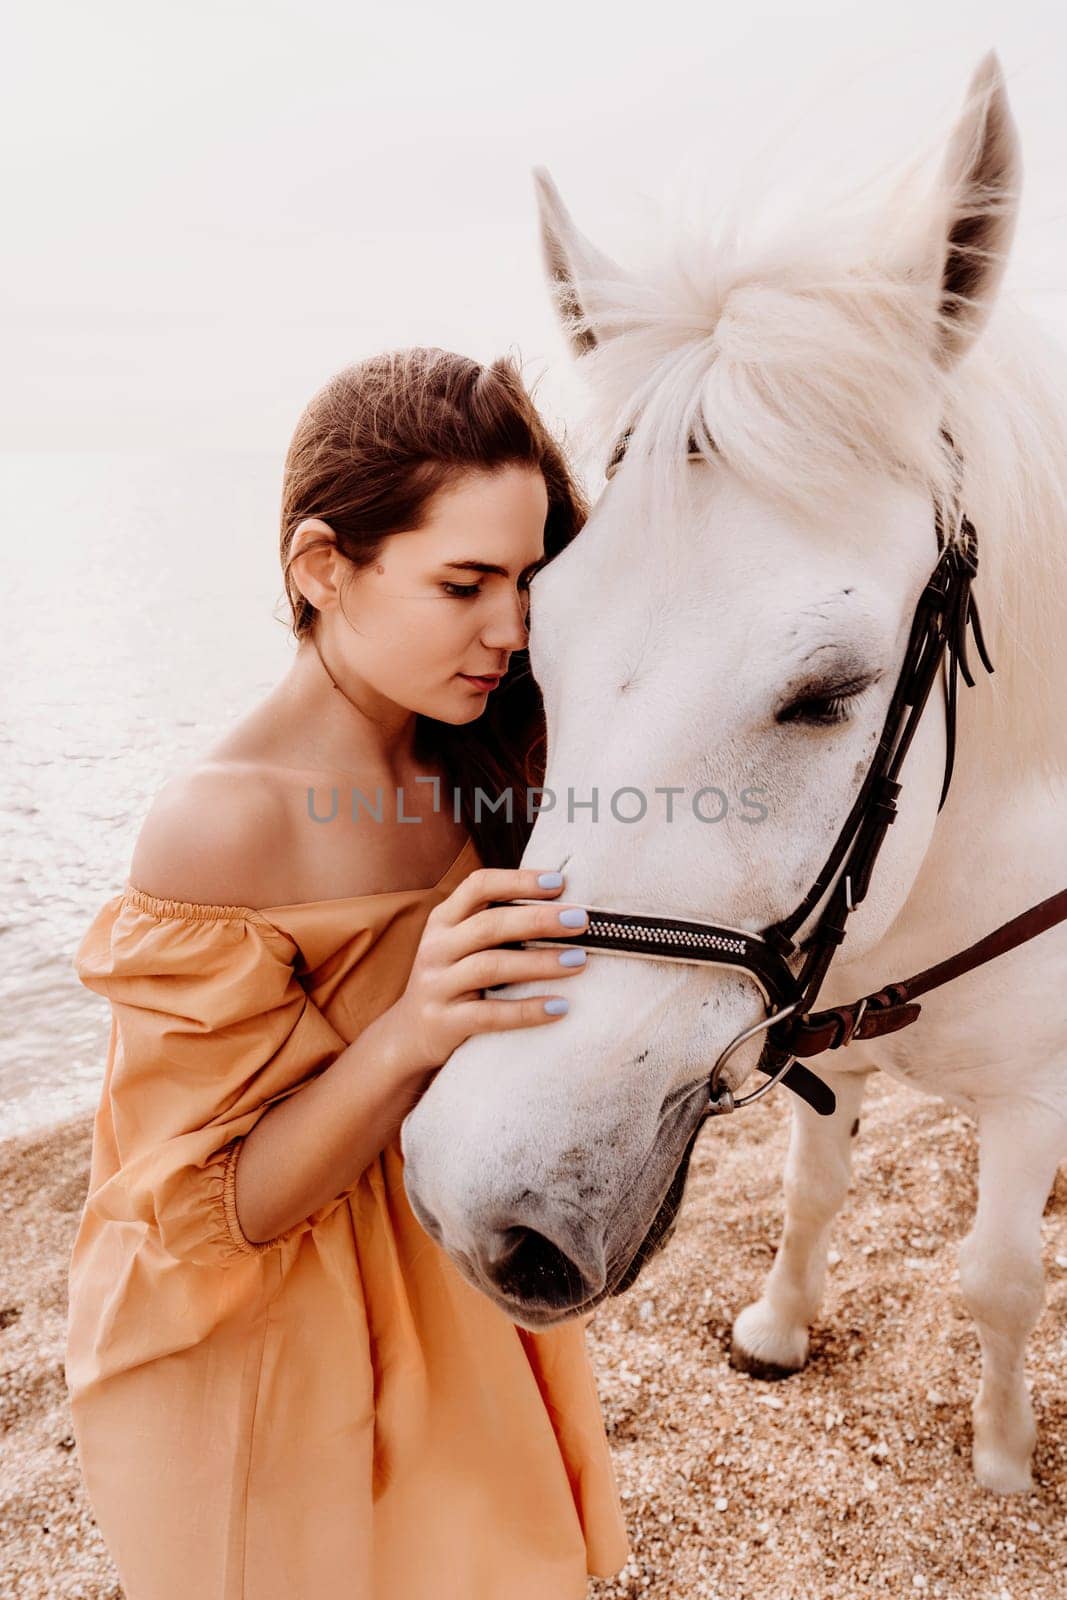 A white horse and a woman in a dress stand on a beach, with the sky and sea creating a picturesque backdrop for the scene. by Matiunina